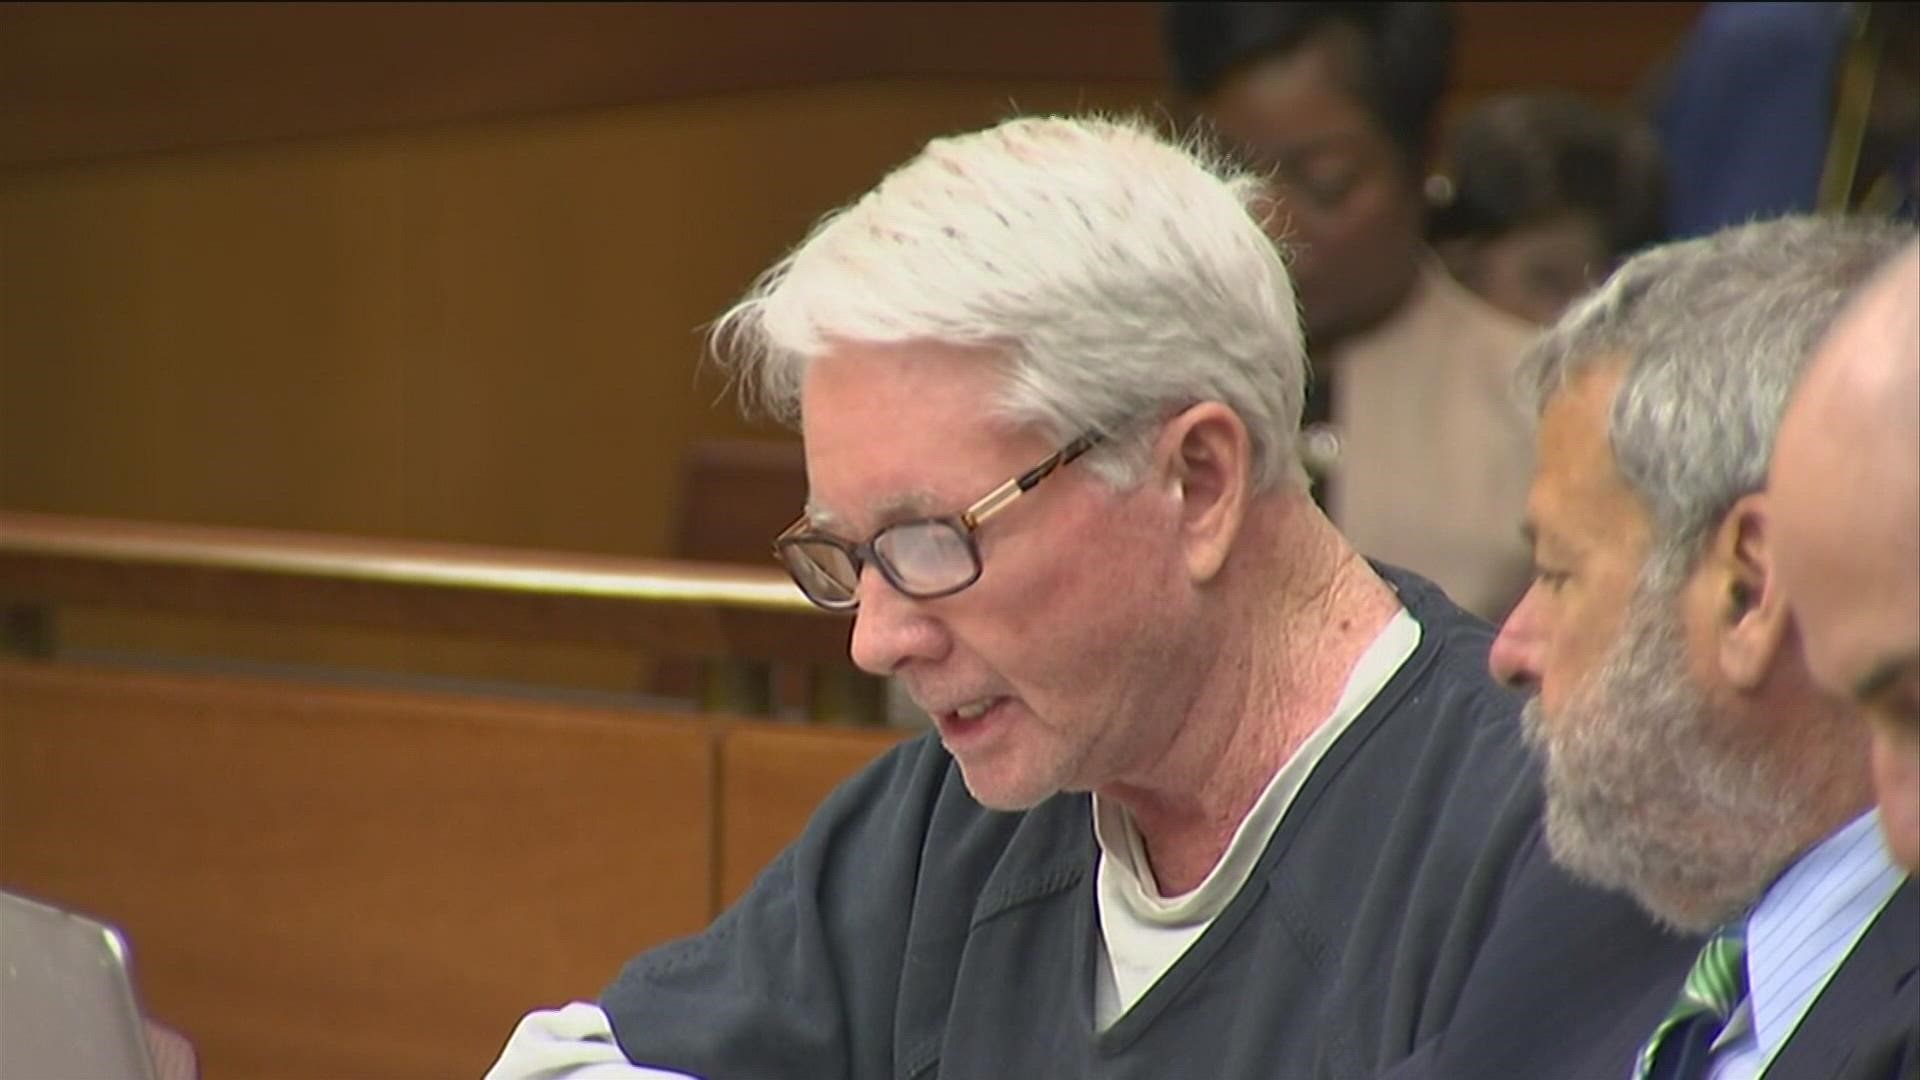 Tex McIver was convicted of felony murder on April 23, 2018, in the death of his wife.